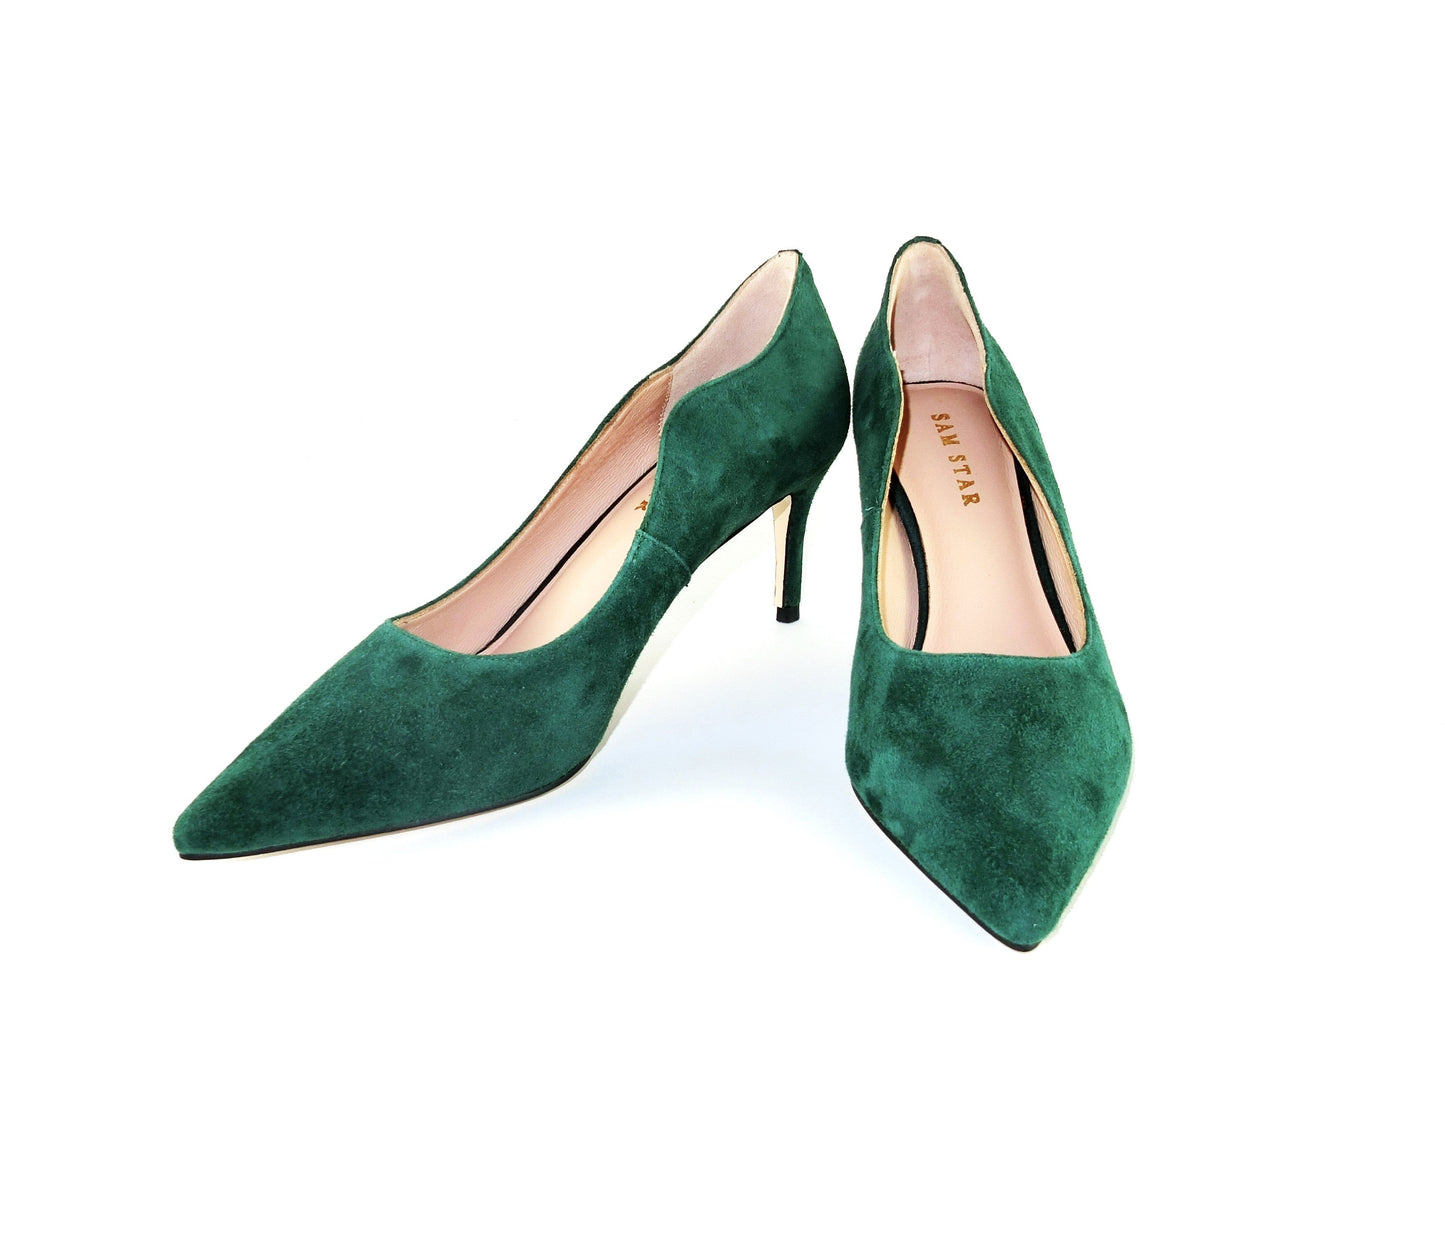 SS23007 Leather court shoes with curve design- Dark green ladies shoes Sam Star shoes Dark green 40/7 